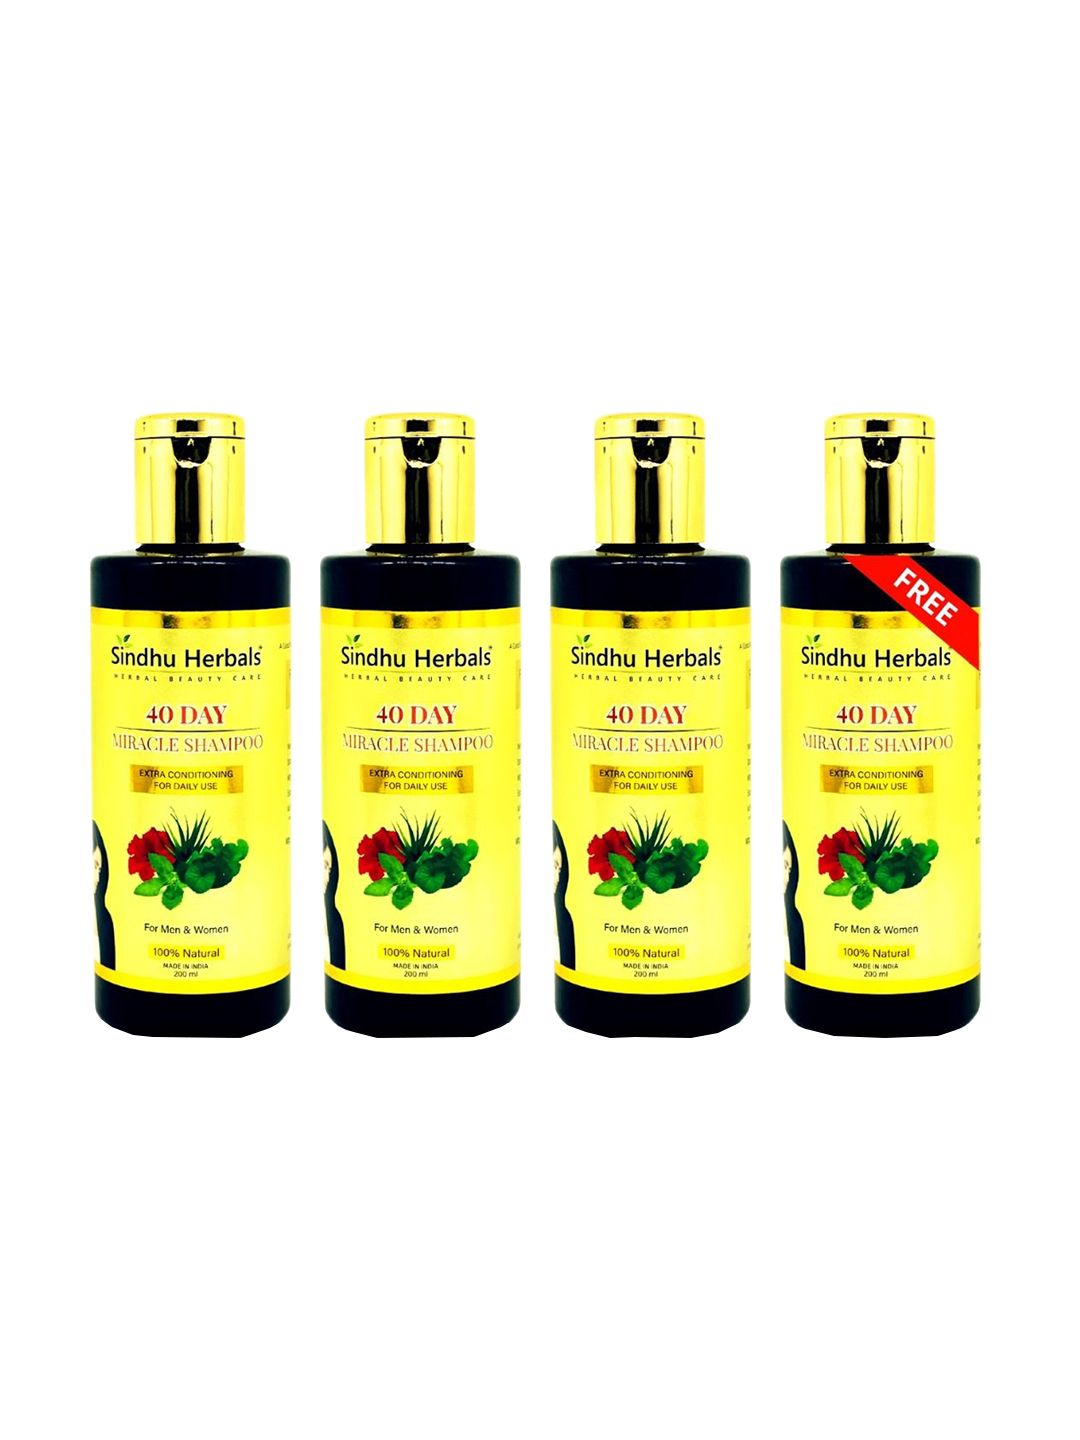 Sindhu Herbals Buy 3 40-Day Miracle Shampoos and Get 1 Shampoo Free Price in India